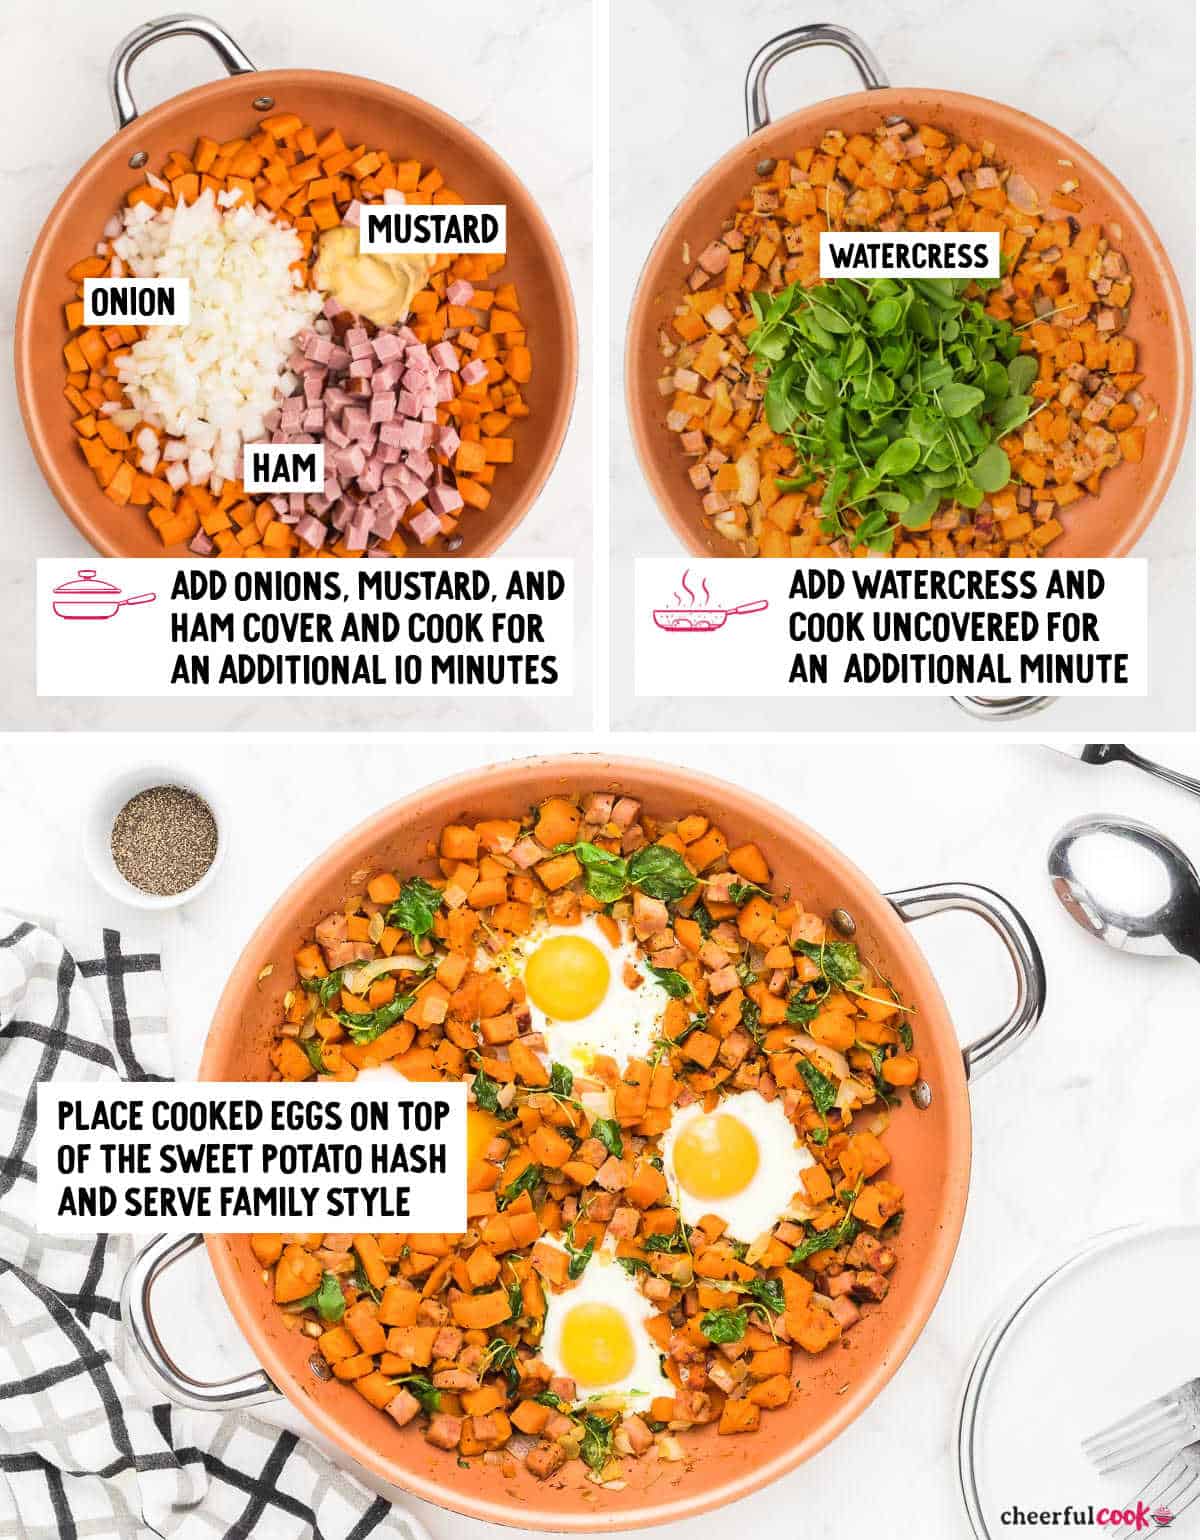 Process steps showing how to make Sweet Potato Hash.